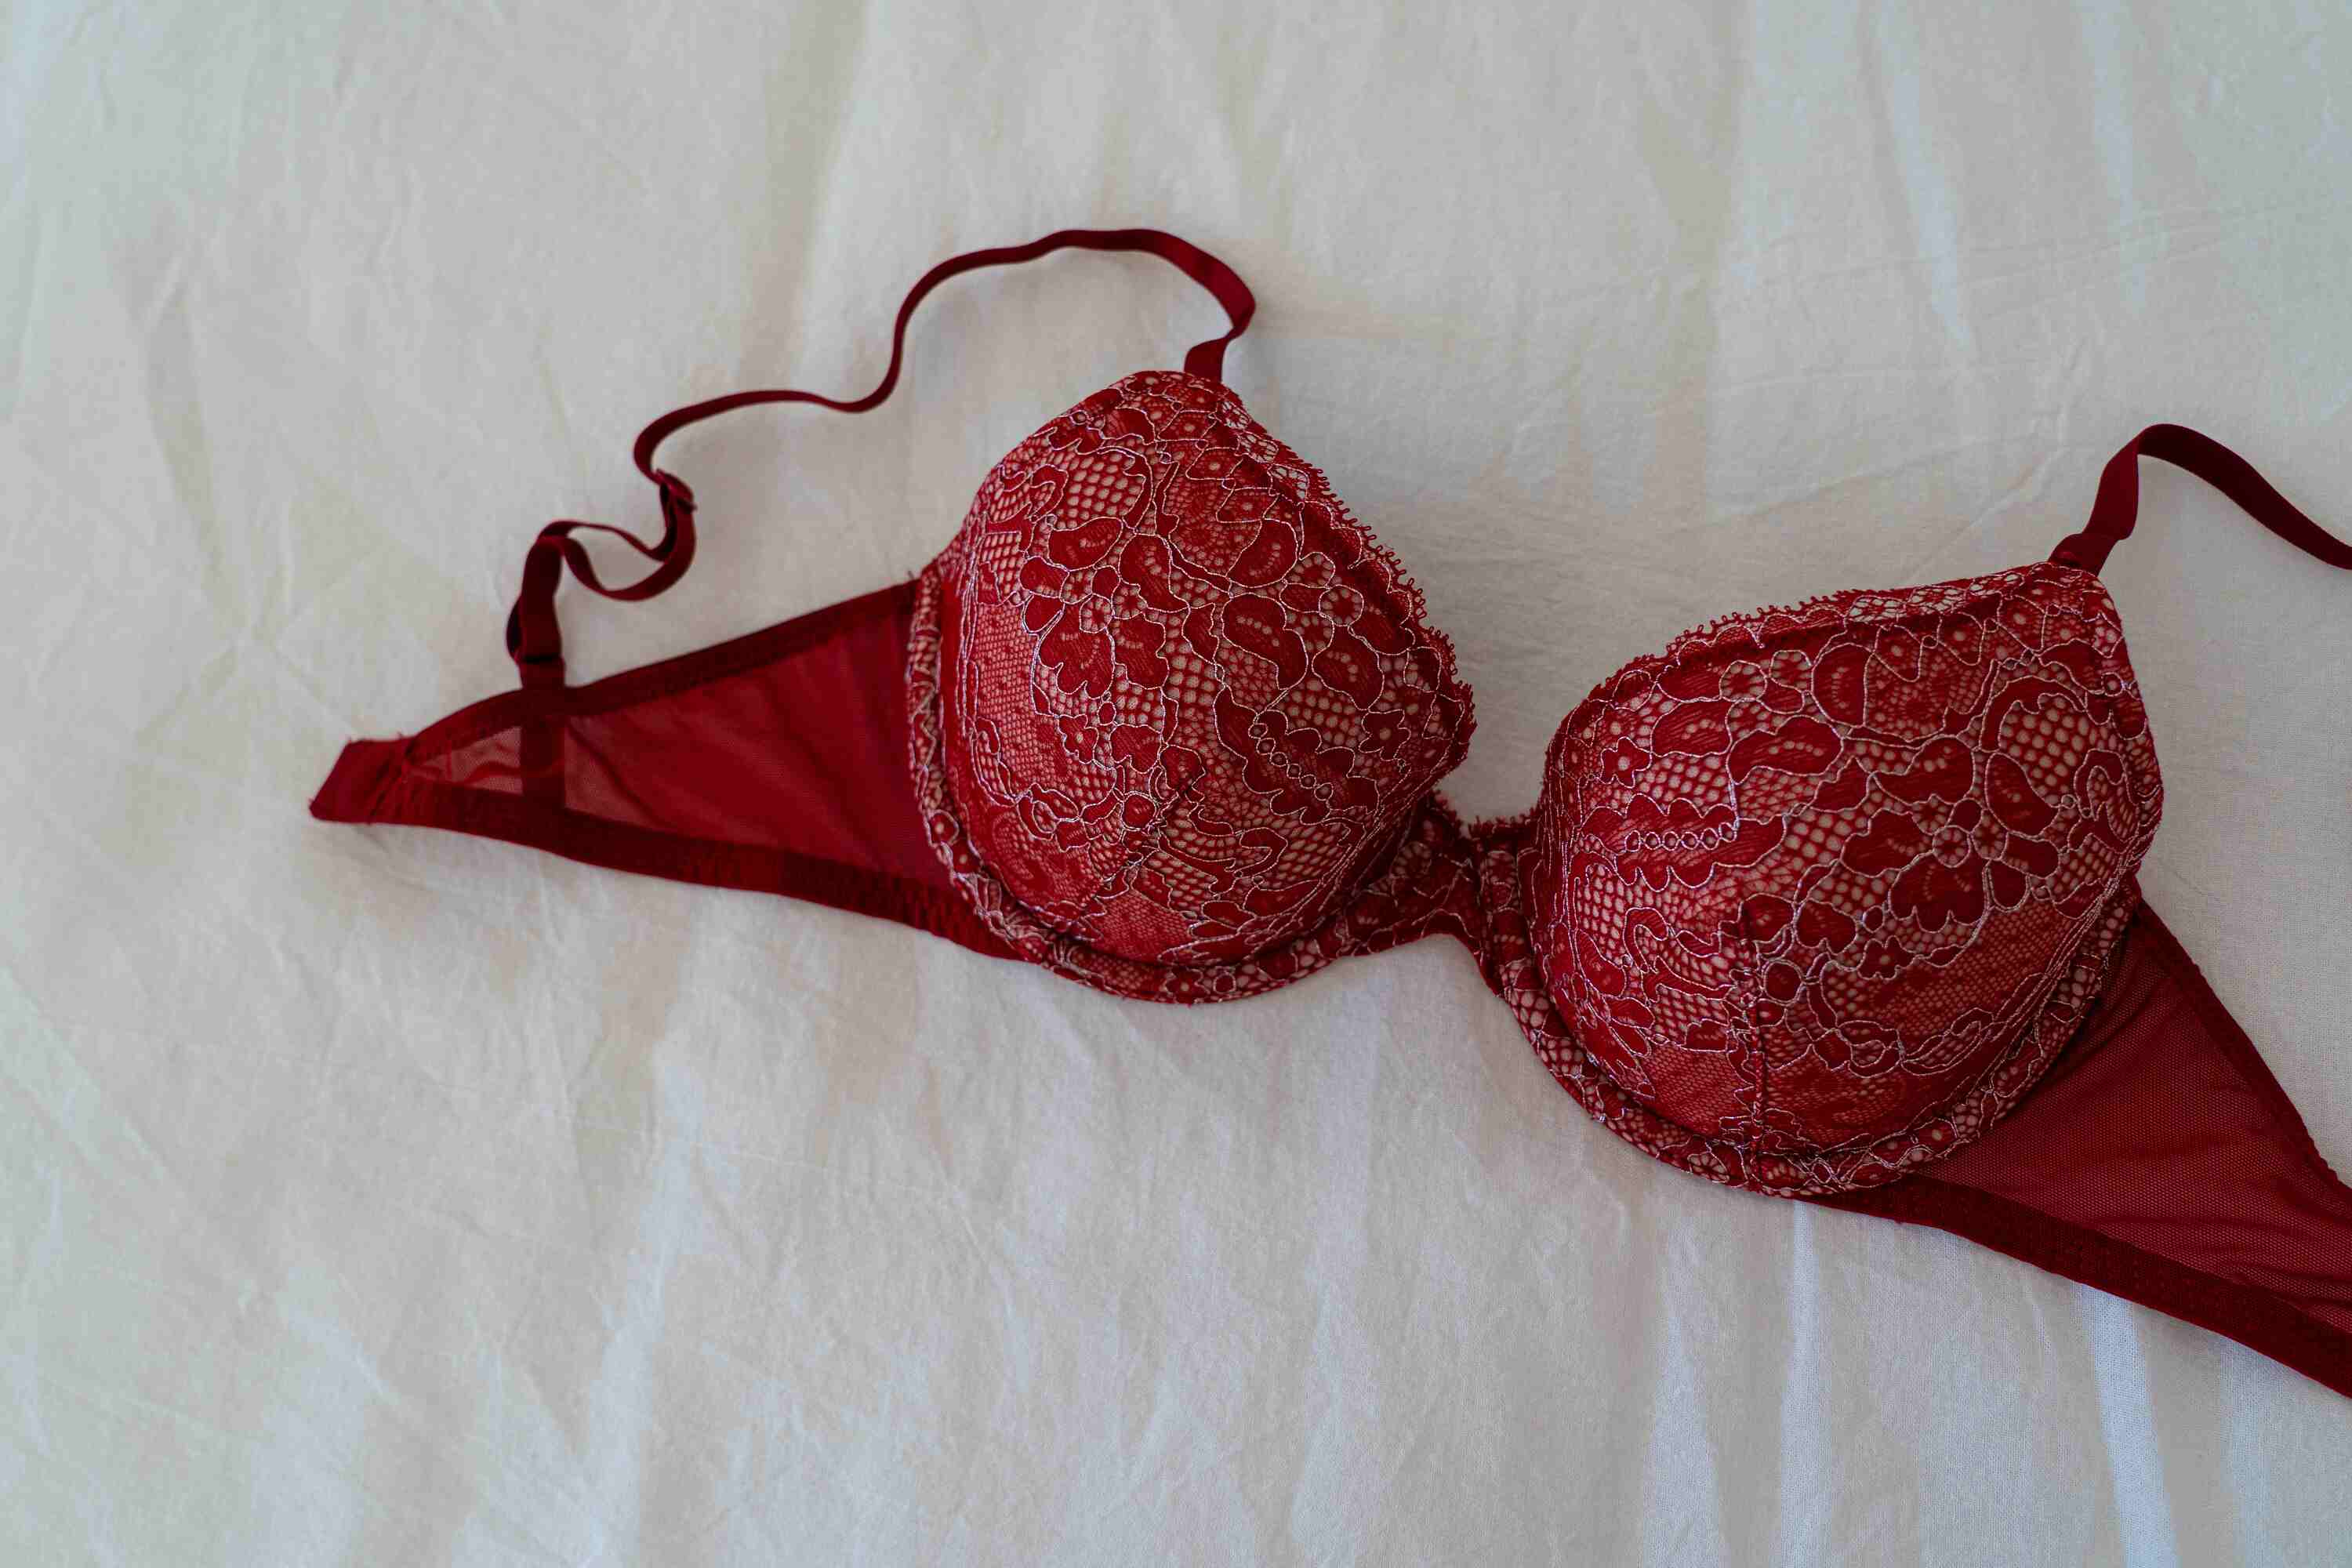 Choosing the Perfect Bra for Teens: A Must-Know Guide! :: NewFemme